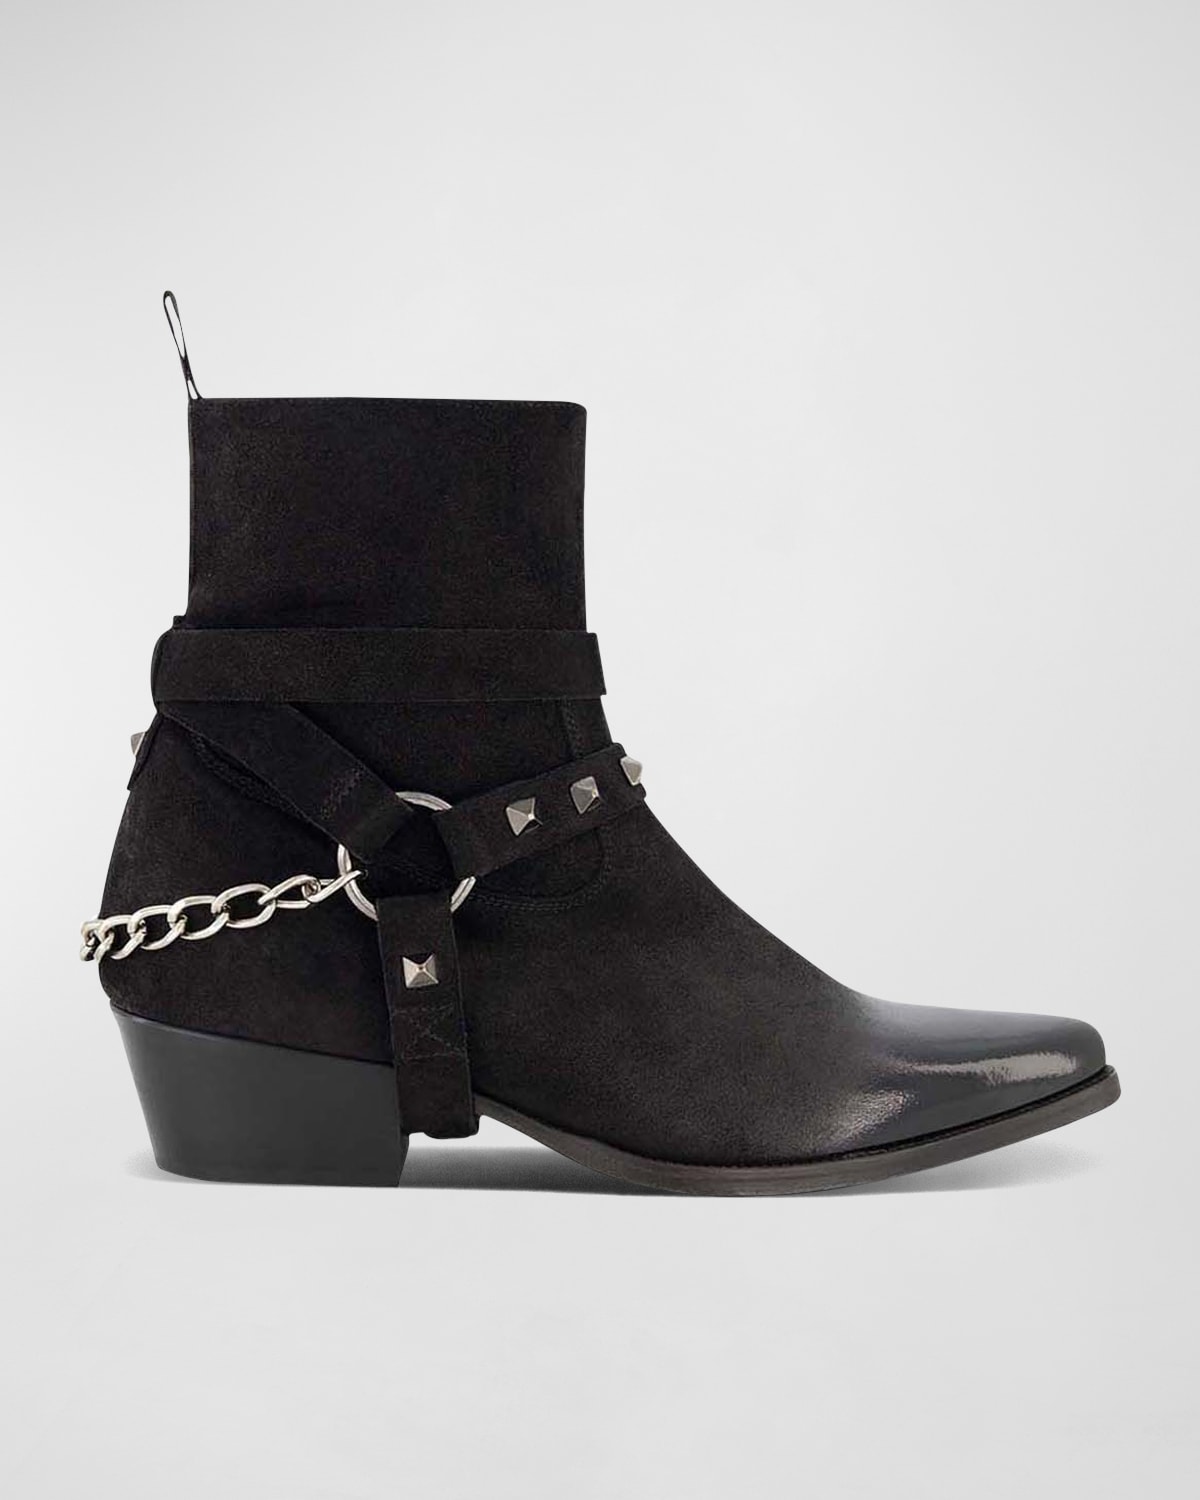 Men's Suede Harness Chain Boots